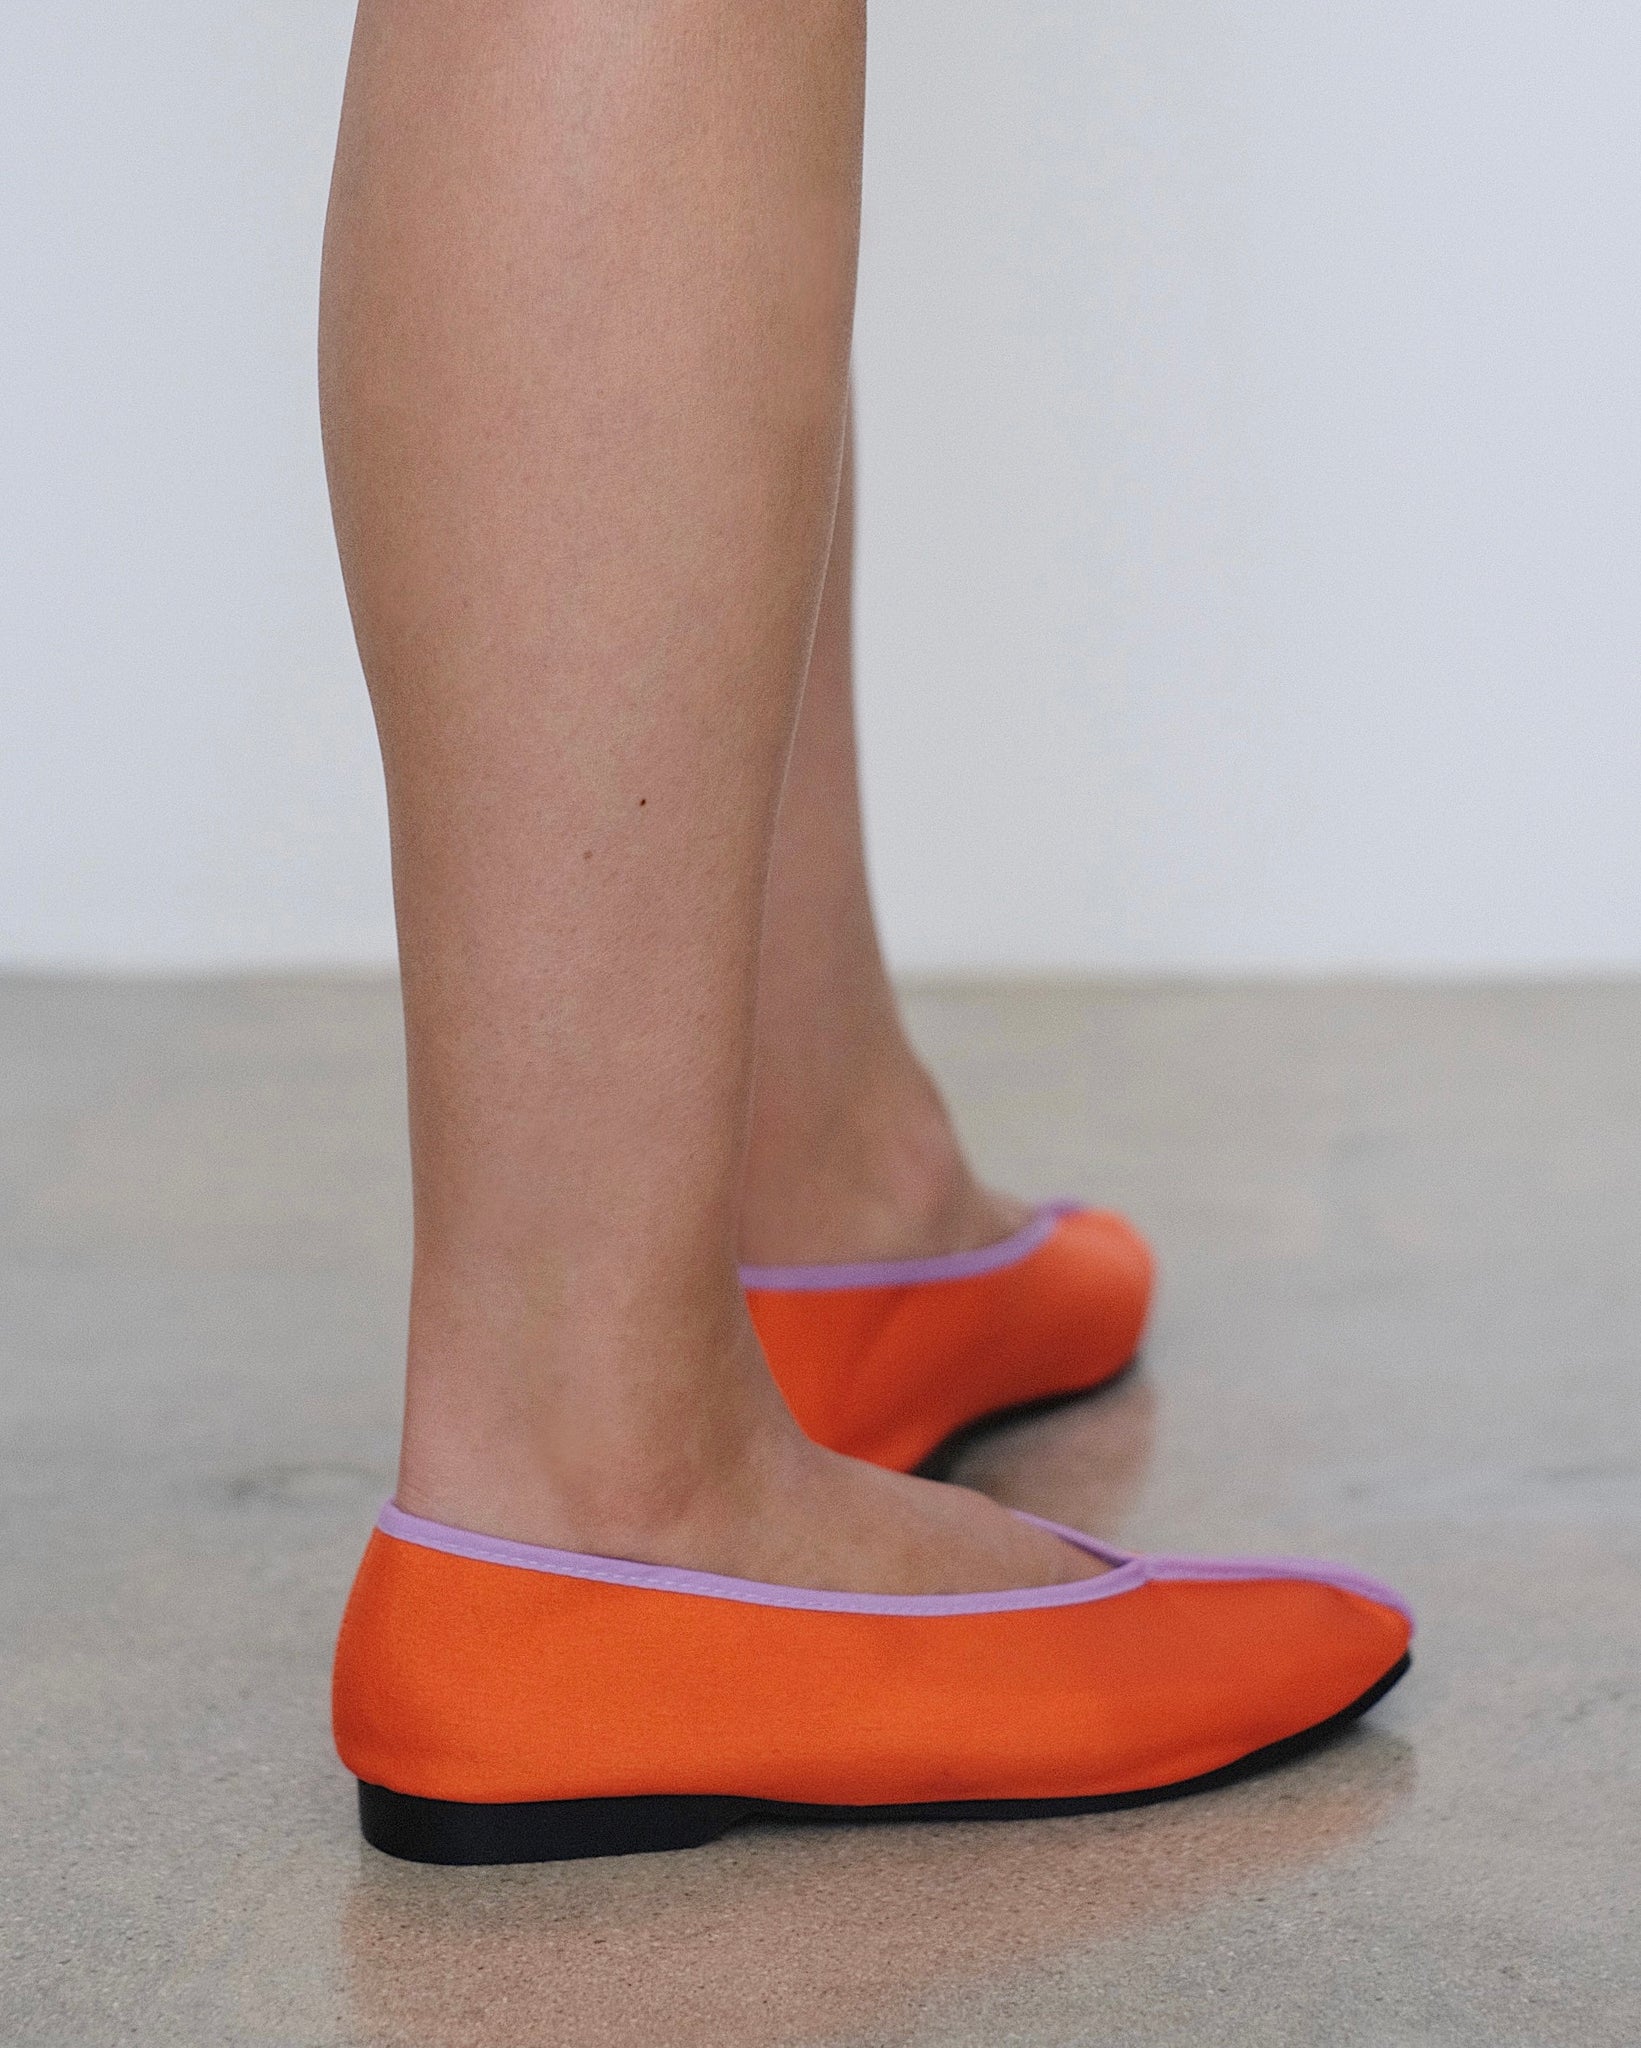 Wax Apple Theater Shoe in Orange Satin with Lilac Piping